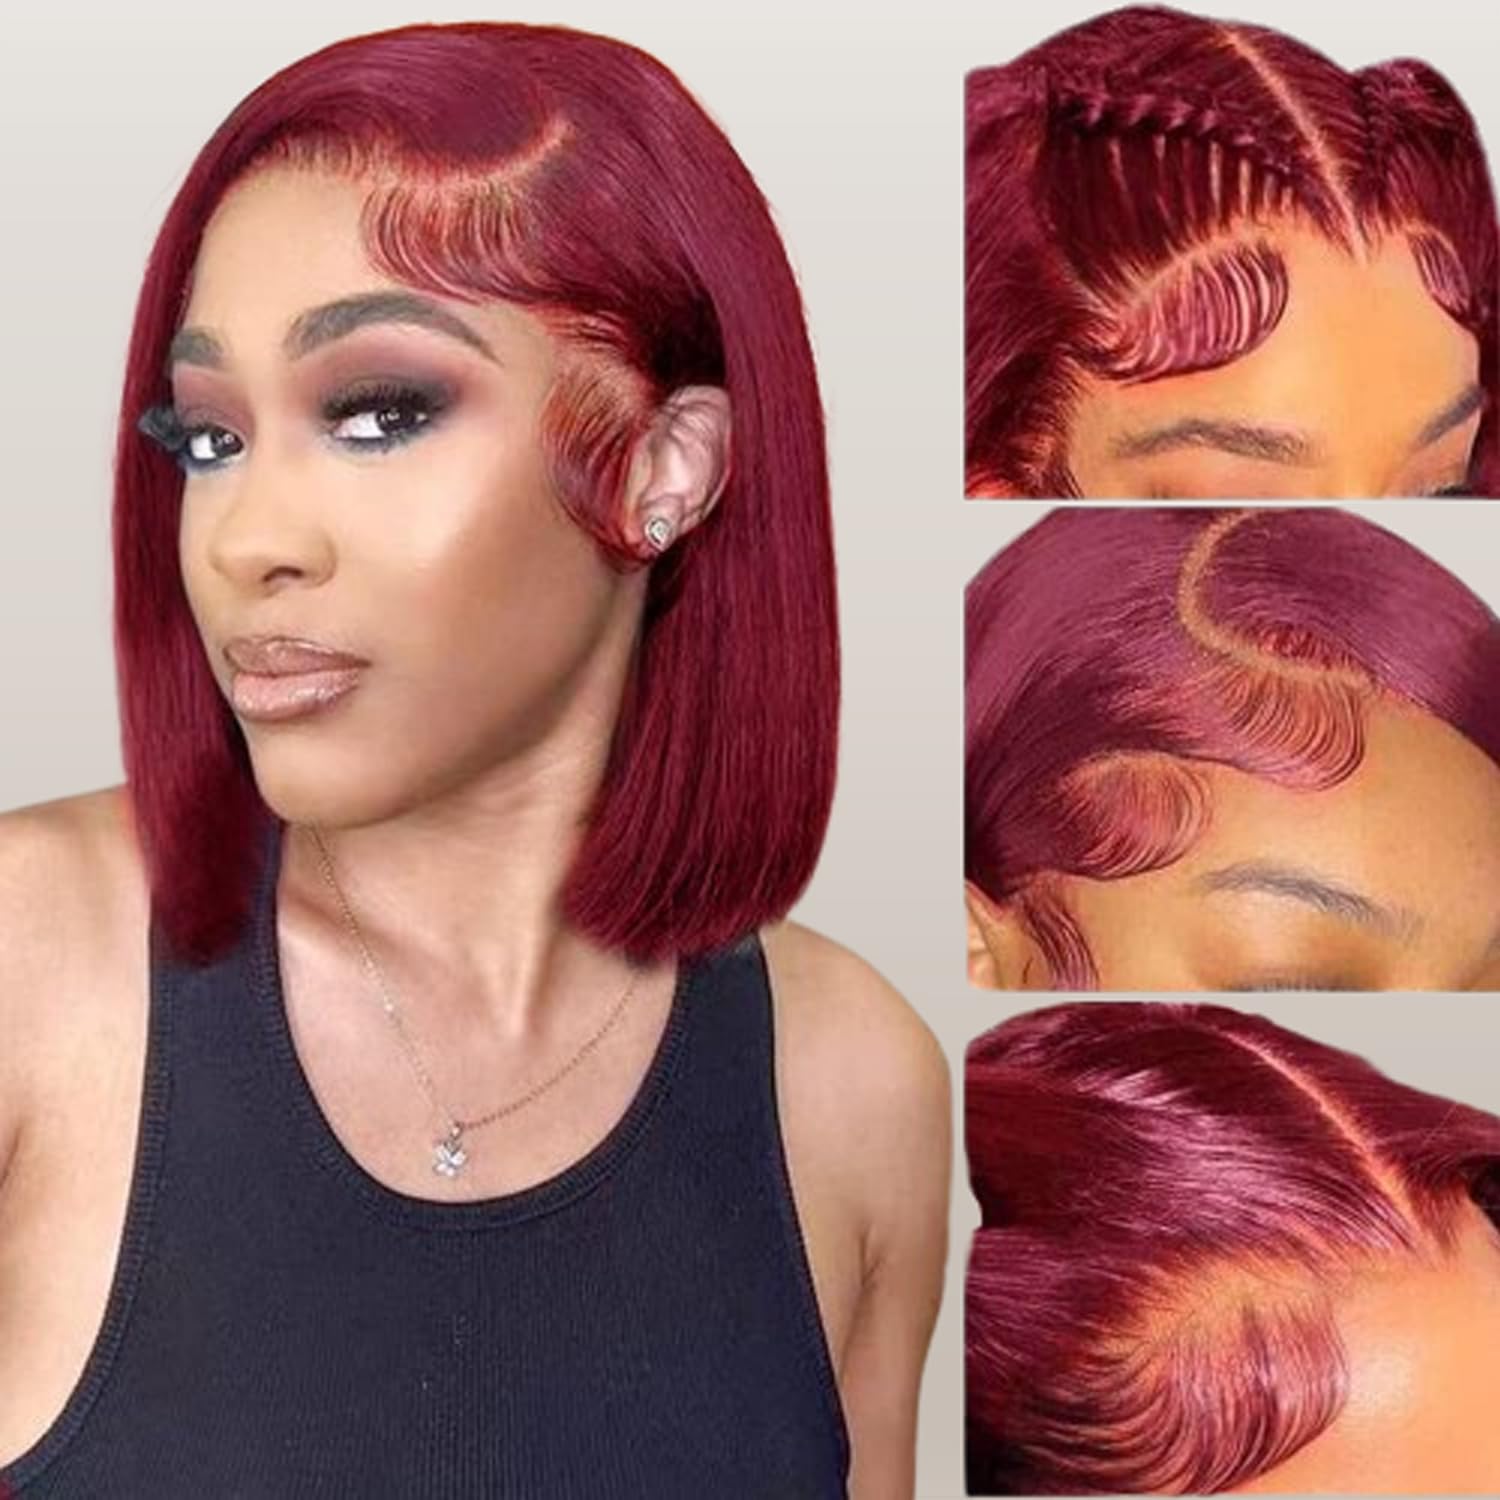 Burgundy Red 99J Color Bob 4x4/13x4 Lace Wigs - Straight Human Hair Wigs for Black Women, 180% Density